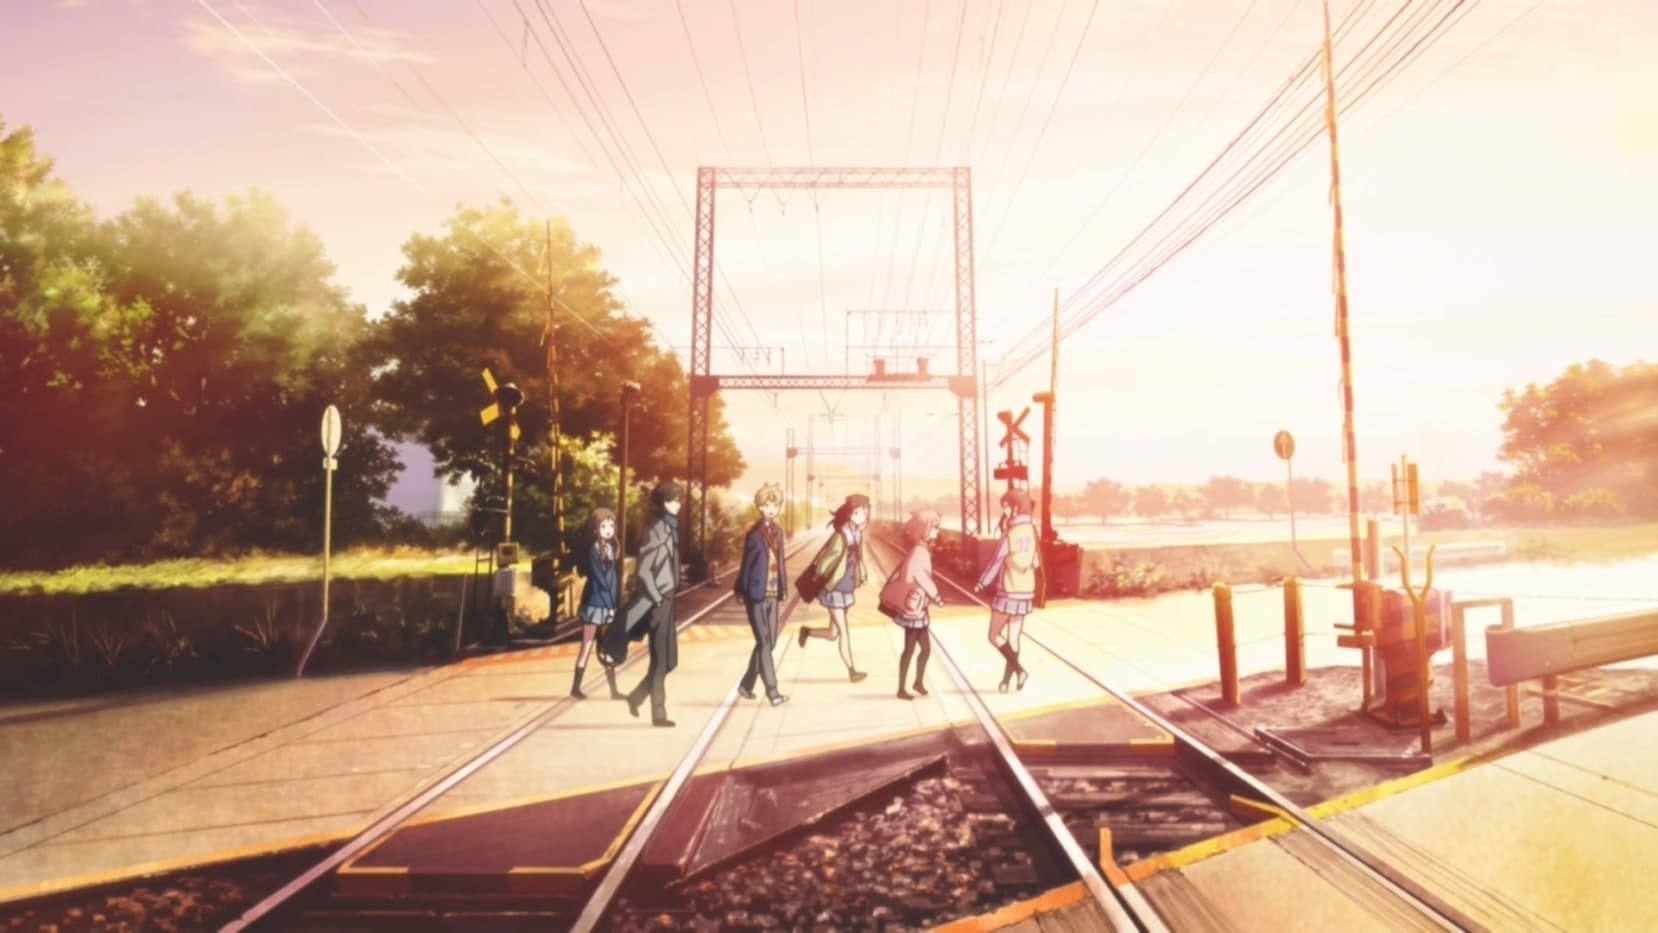 Beyond the Boundary:  I’ll Be Here - Die Zukunft